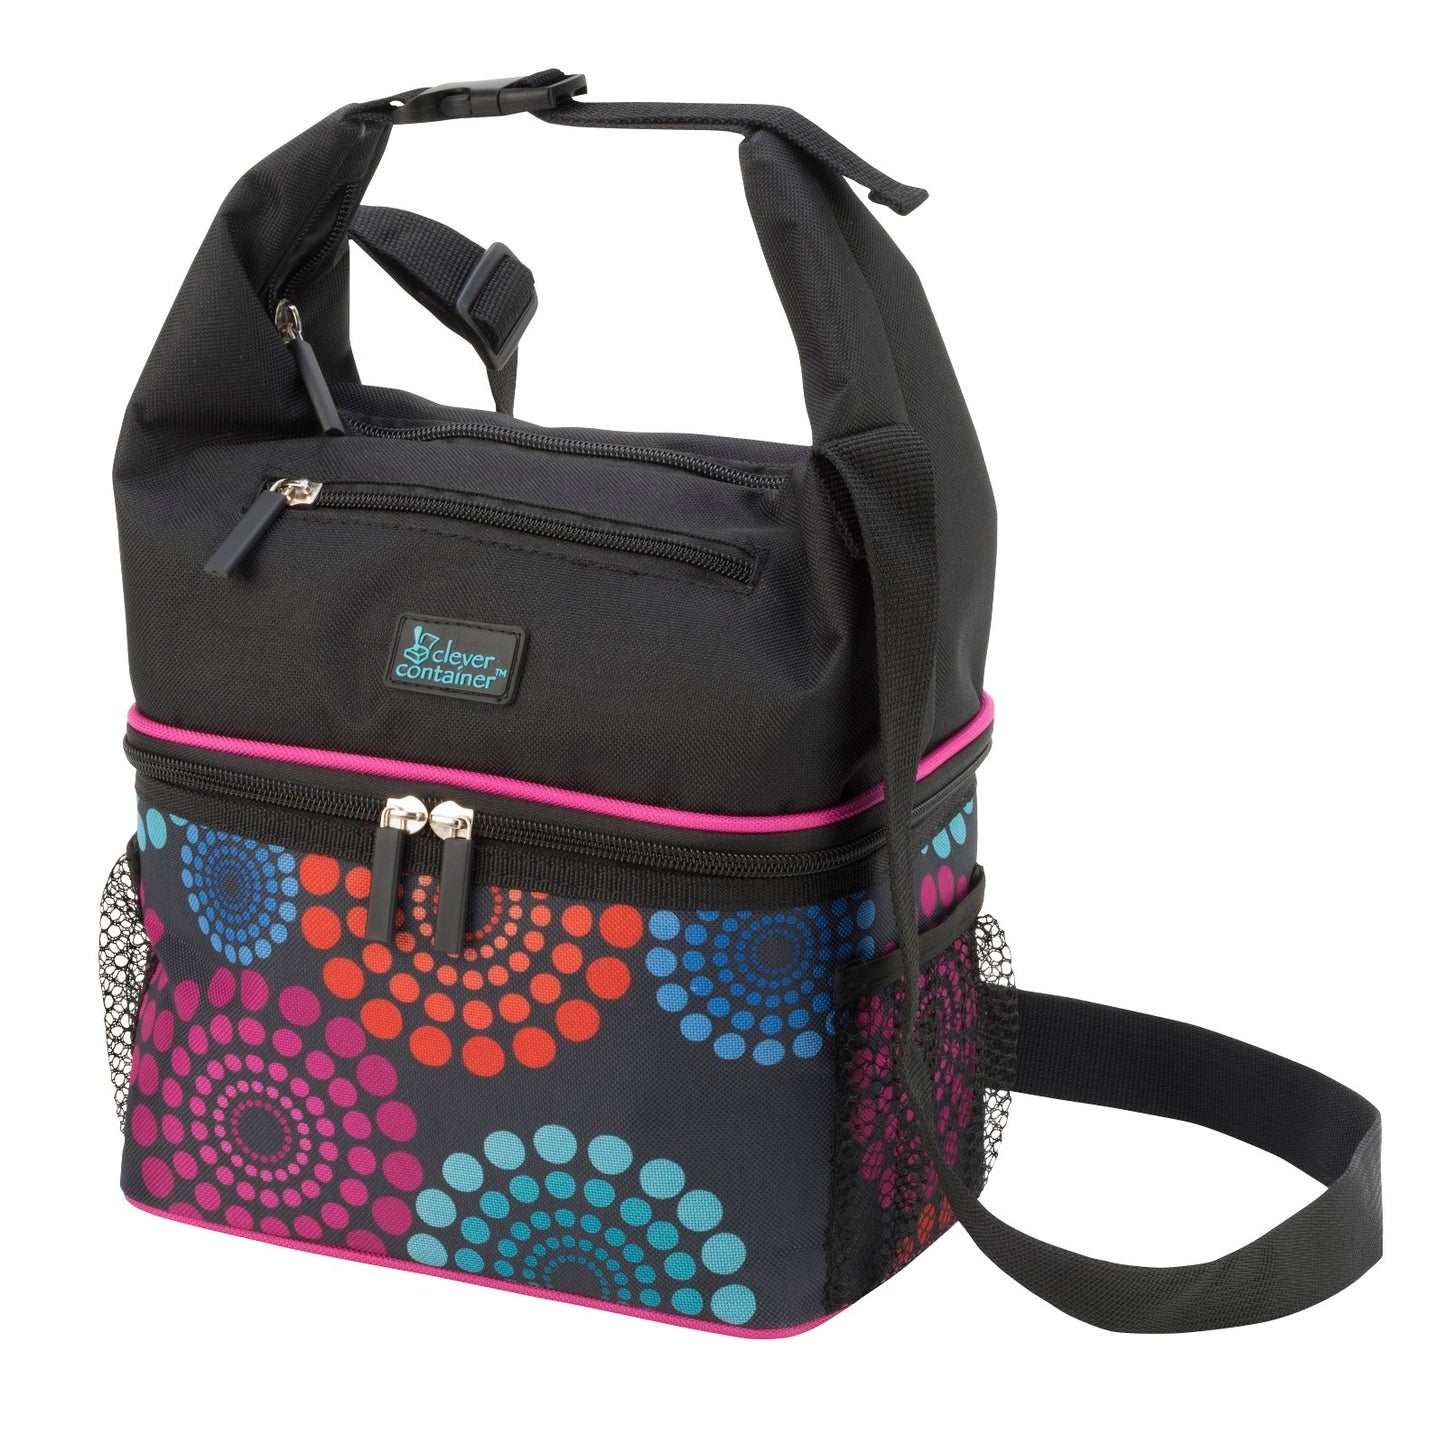 Compact Lunch Cooler - 2 Insulated Compartments - Bright Lights Pattern